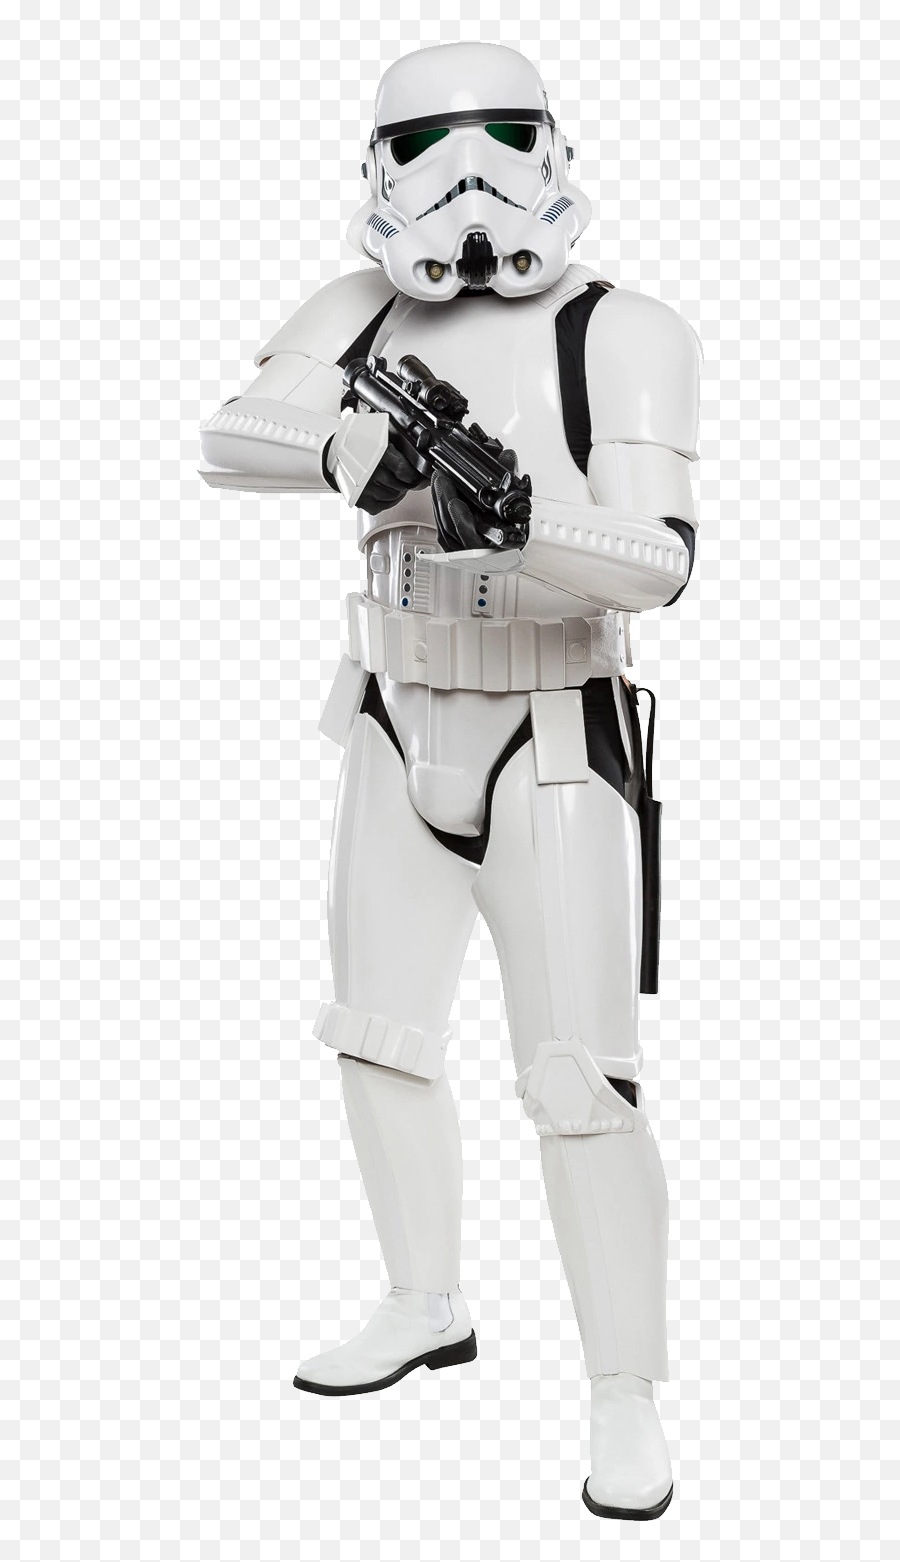 Download Stormtrooper Png Image For Free - Star Wars Stormtrooper,Storm Trooper Png